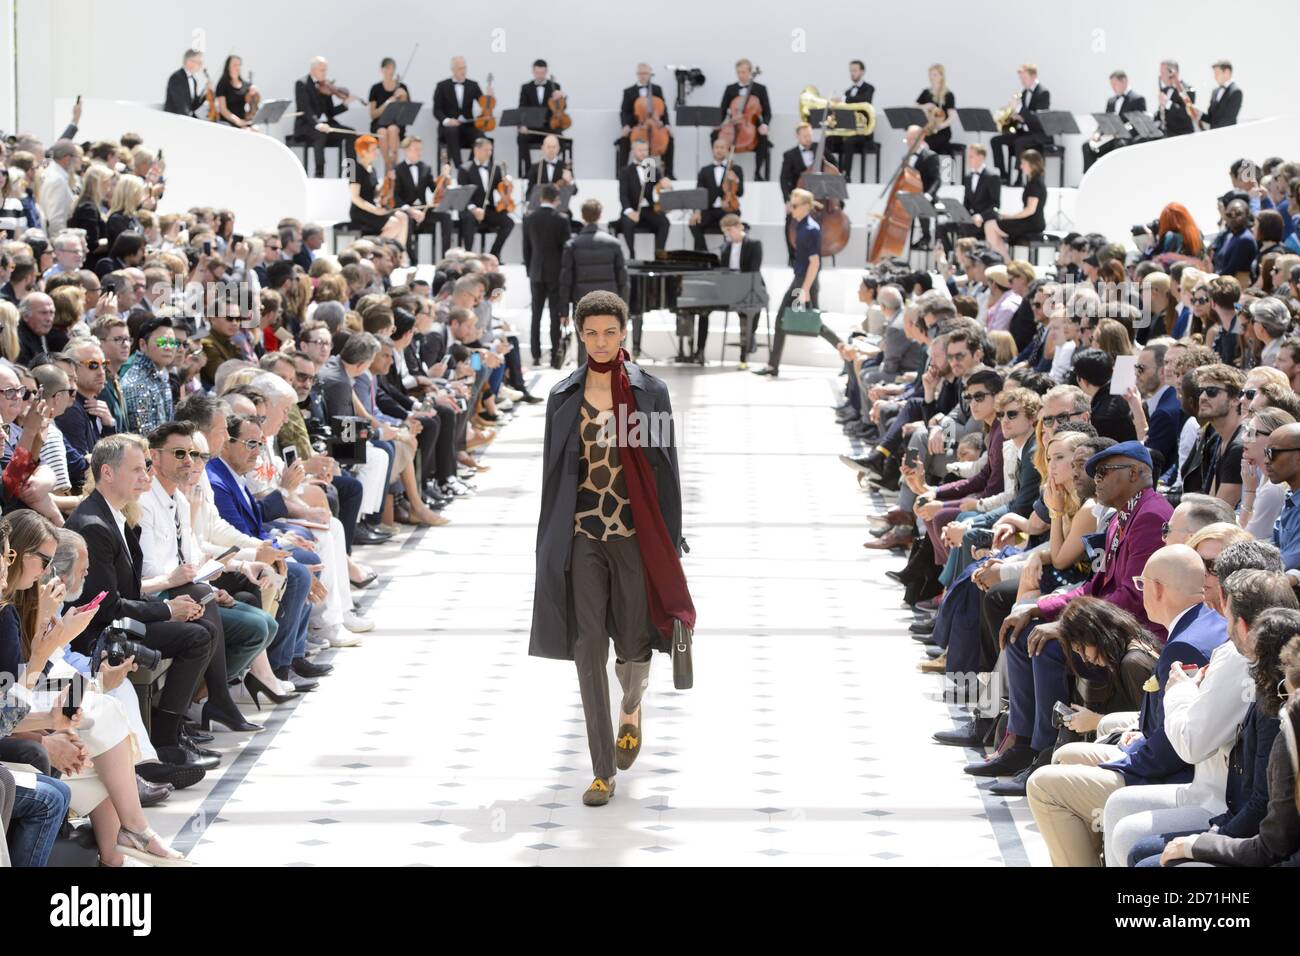 Models on the catwalk during the Burberry Prorsum Men's Fashion Show as  part of the London Collections: Men SS16 collection, held at Perks Field,  Kensington Gardens, London (Mandatory Credit: MATT CROSSICK/ EMPICS